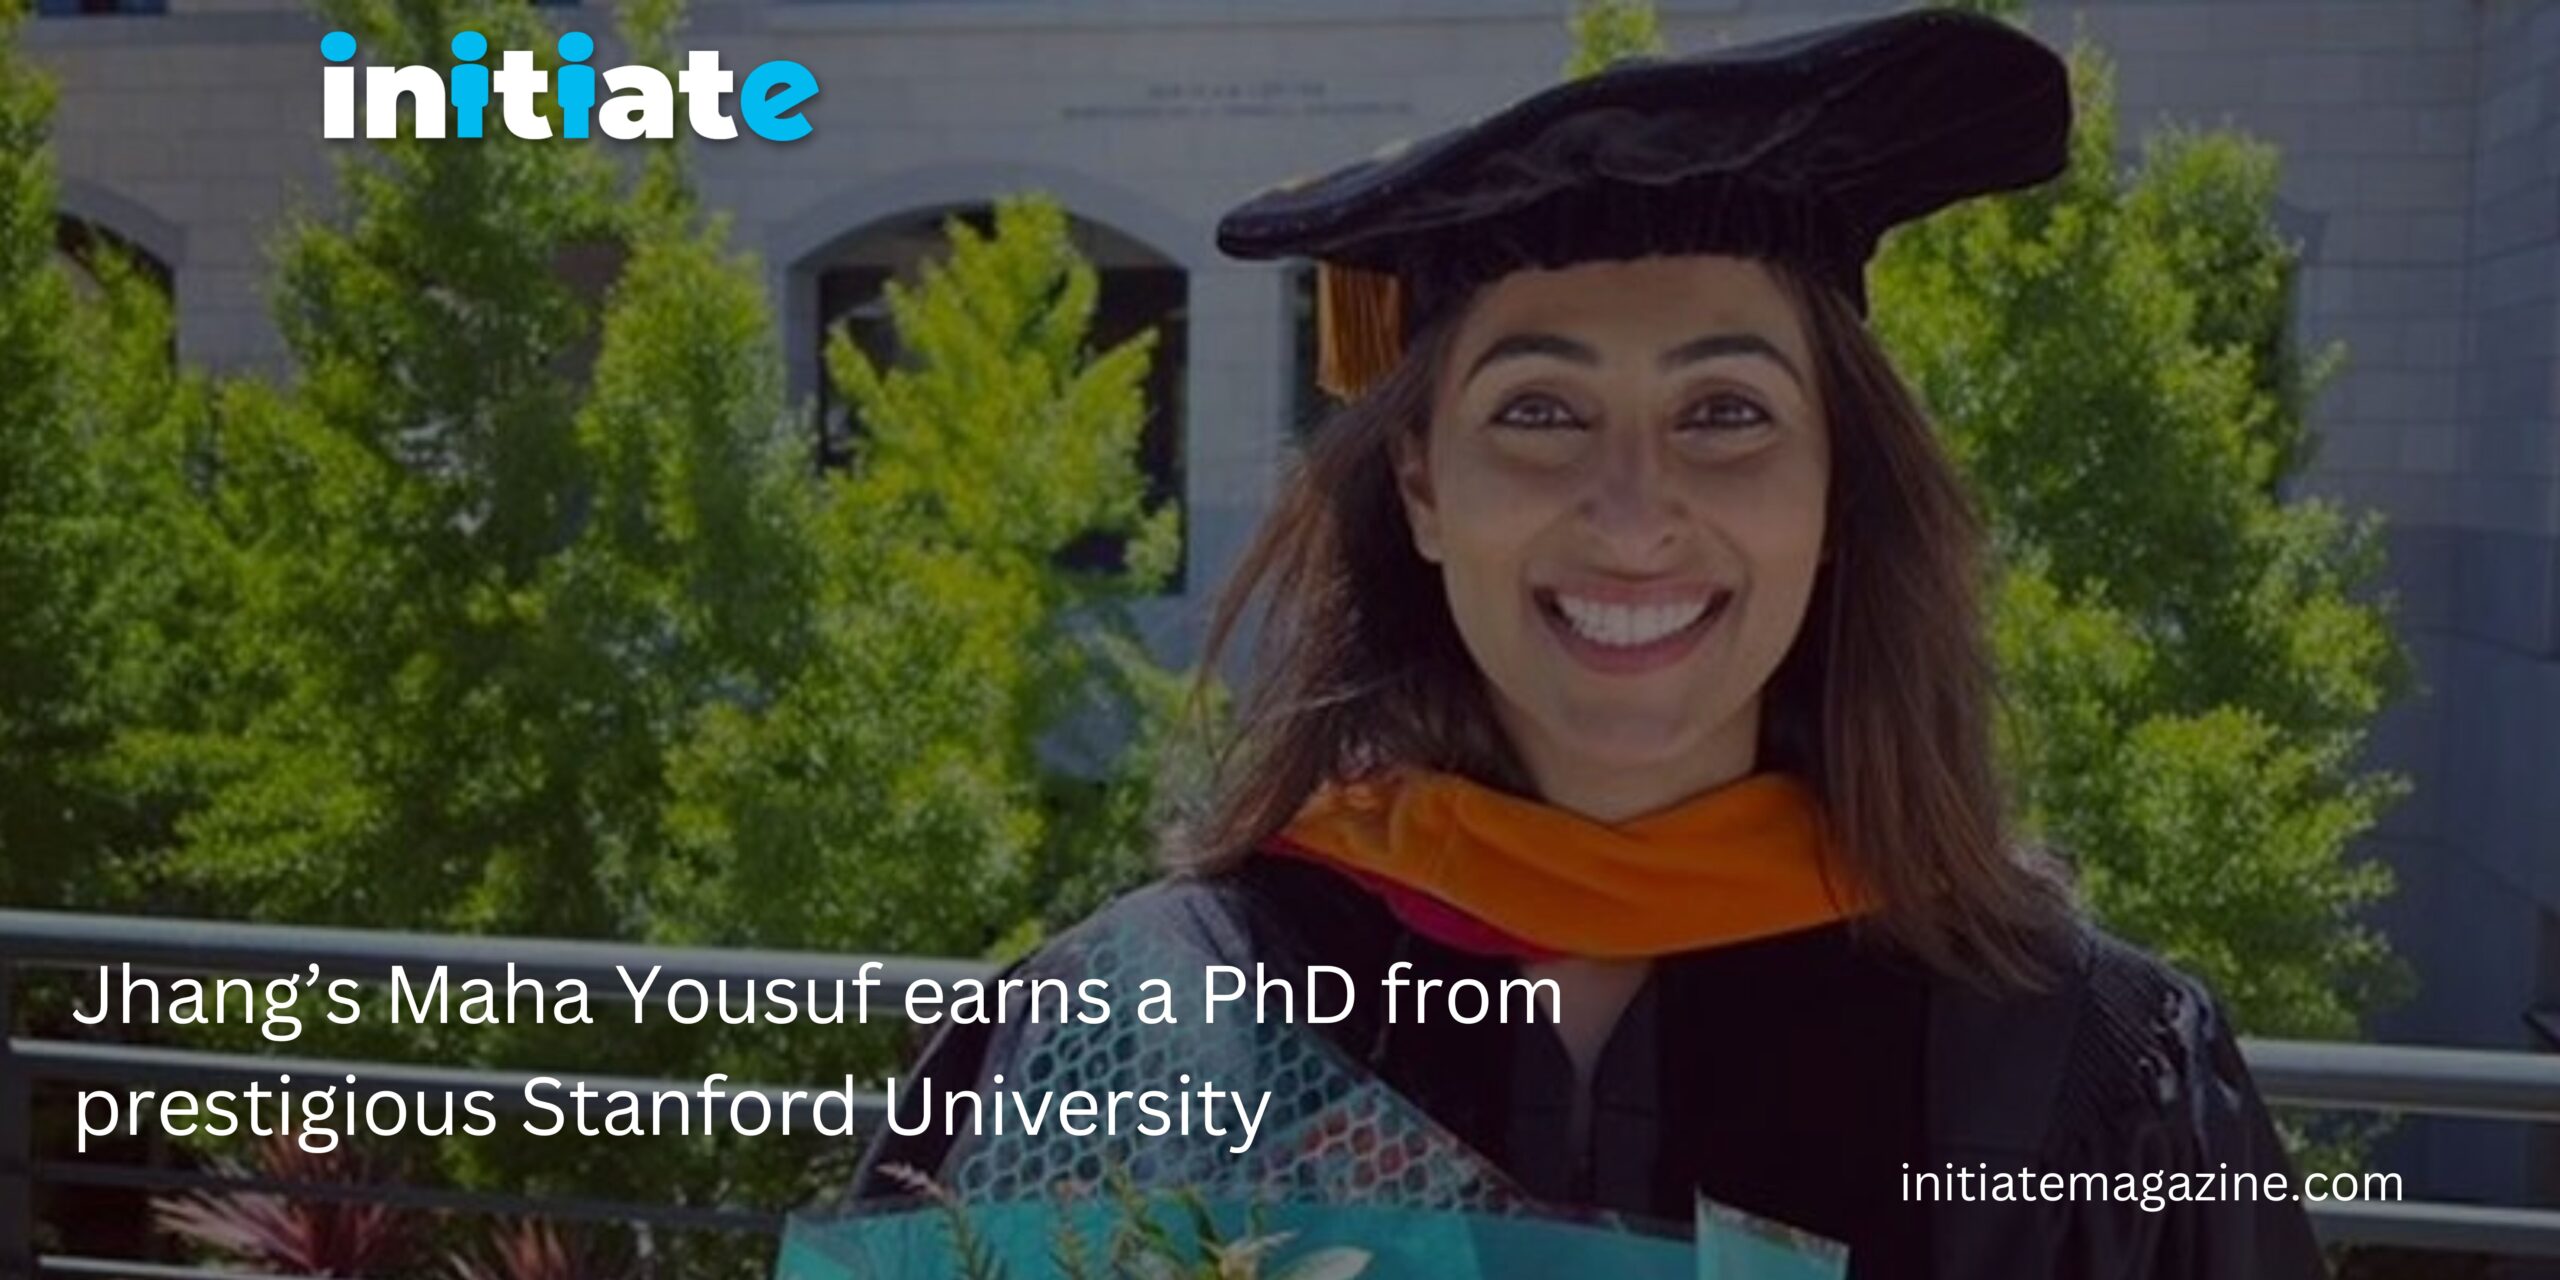 Jhang’s Maha Yousuf earns a PhD from prestigious Stanford University